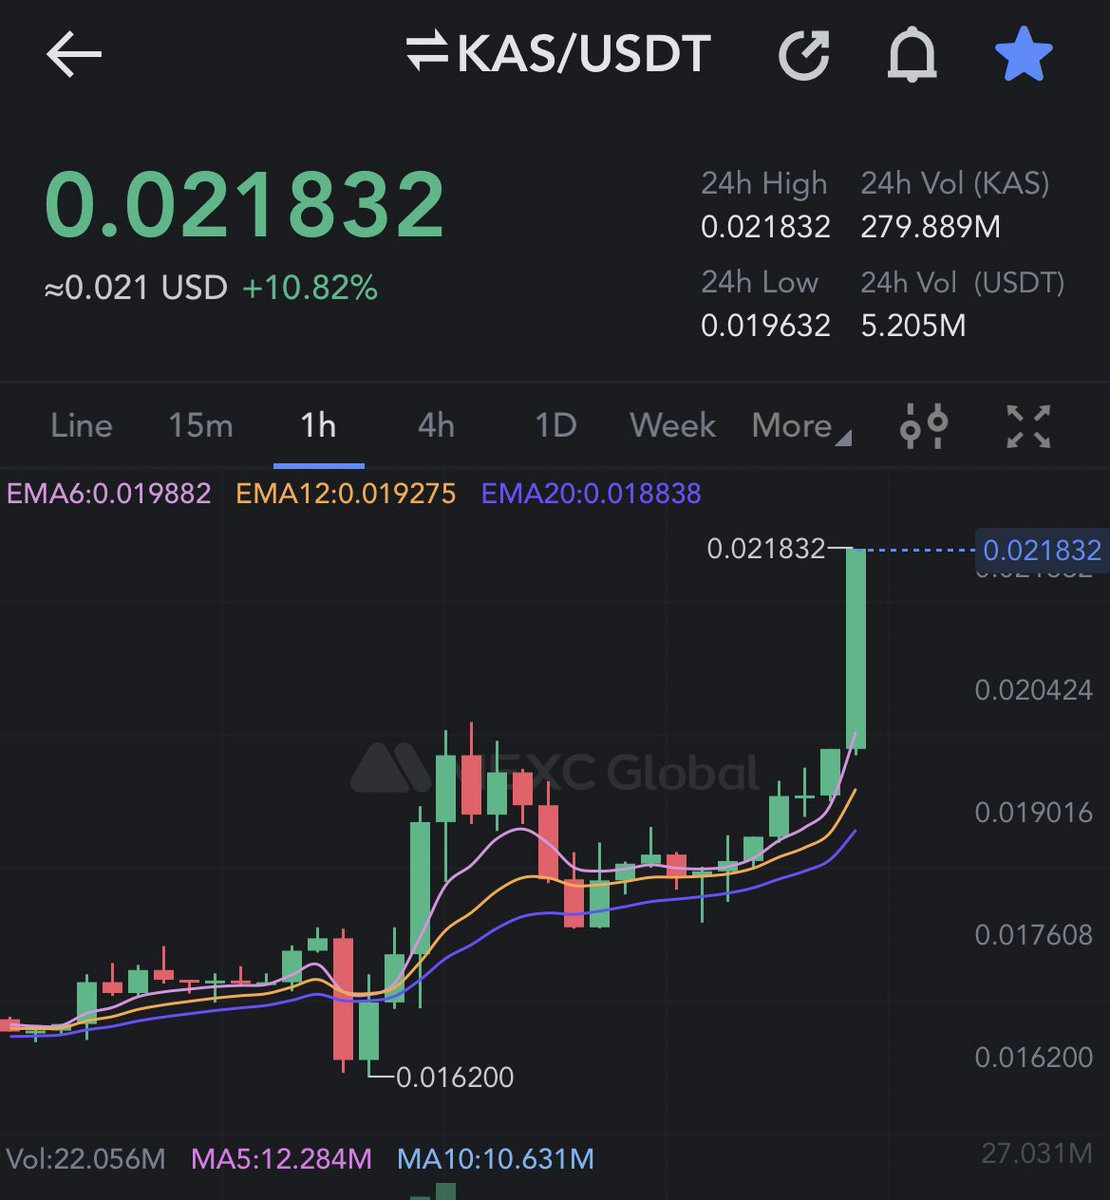 #kaspa gets going again.

Please fasten your seatbelts. It's going to be a wild ride.

#crypto #btc $kas